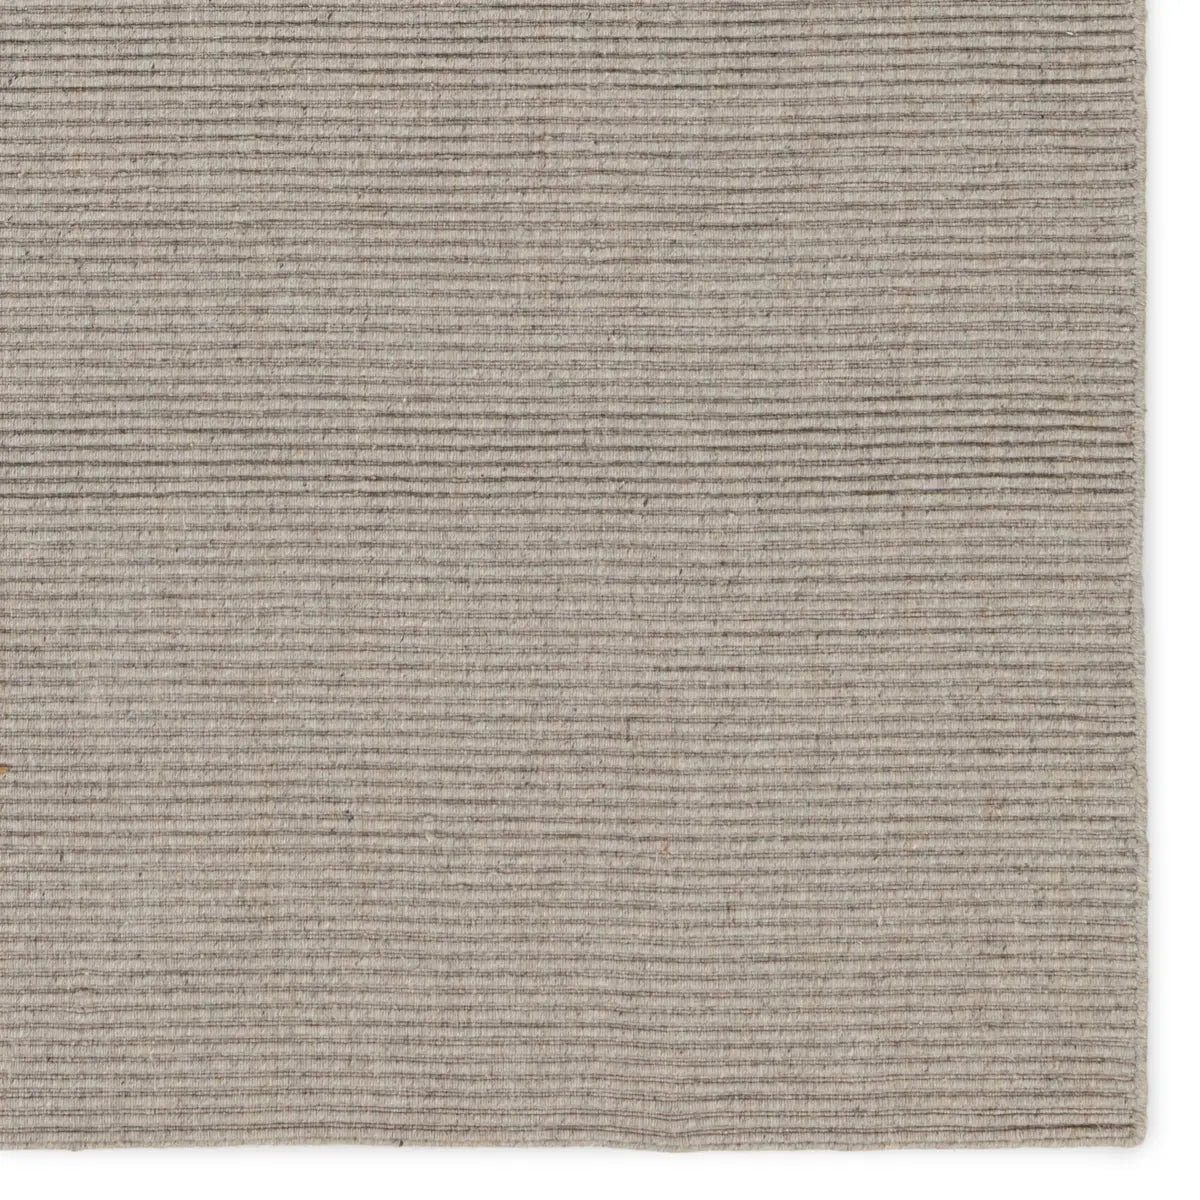 The Strada Shyre Morn Rug features a unique texture and casual comfort that effortlessly grounds spaces with a solid hue. This handwoven wool rug is crafted from undyed yarn for a distinctive, neutral colorway with natural variation for a bit of dimension. Amethyst Home provides interior design services, furniture, rugs, and lighting in the Omaha metro area.